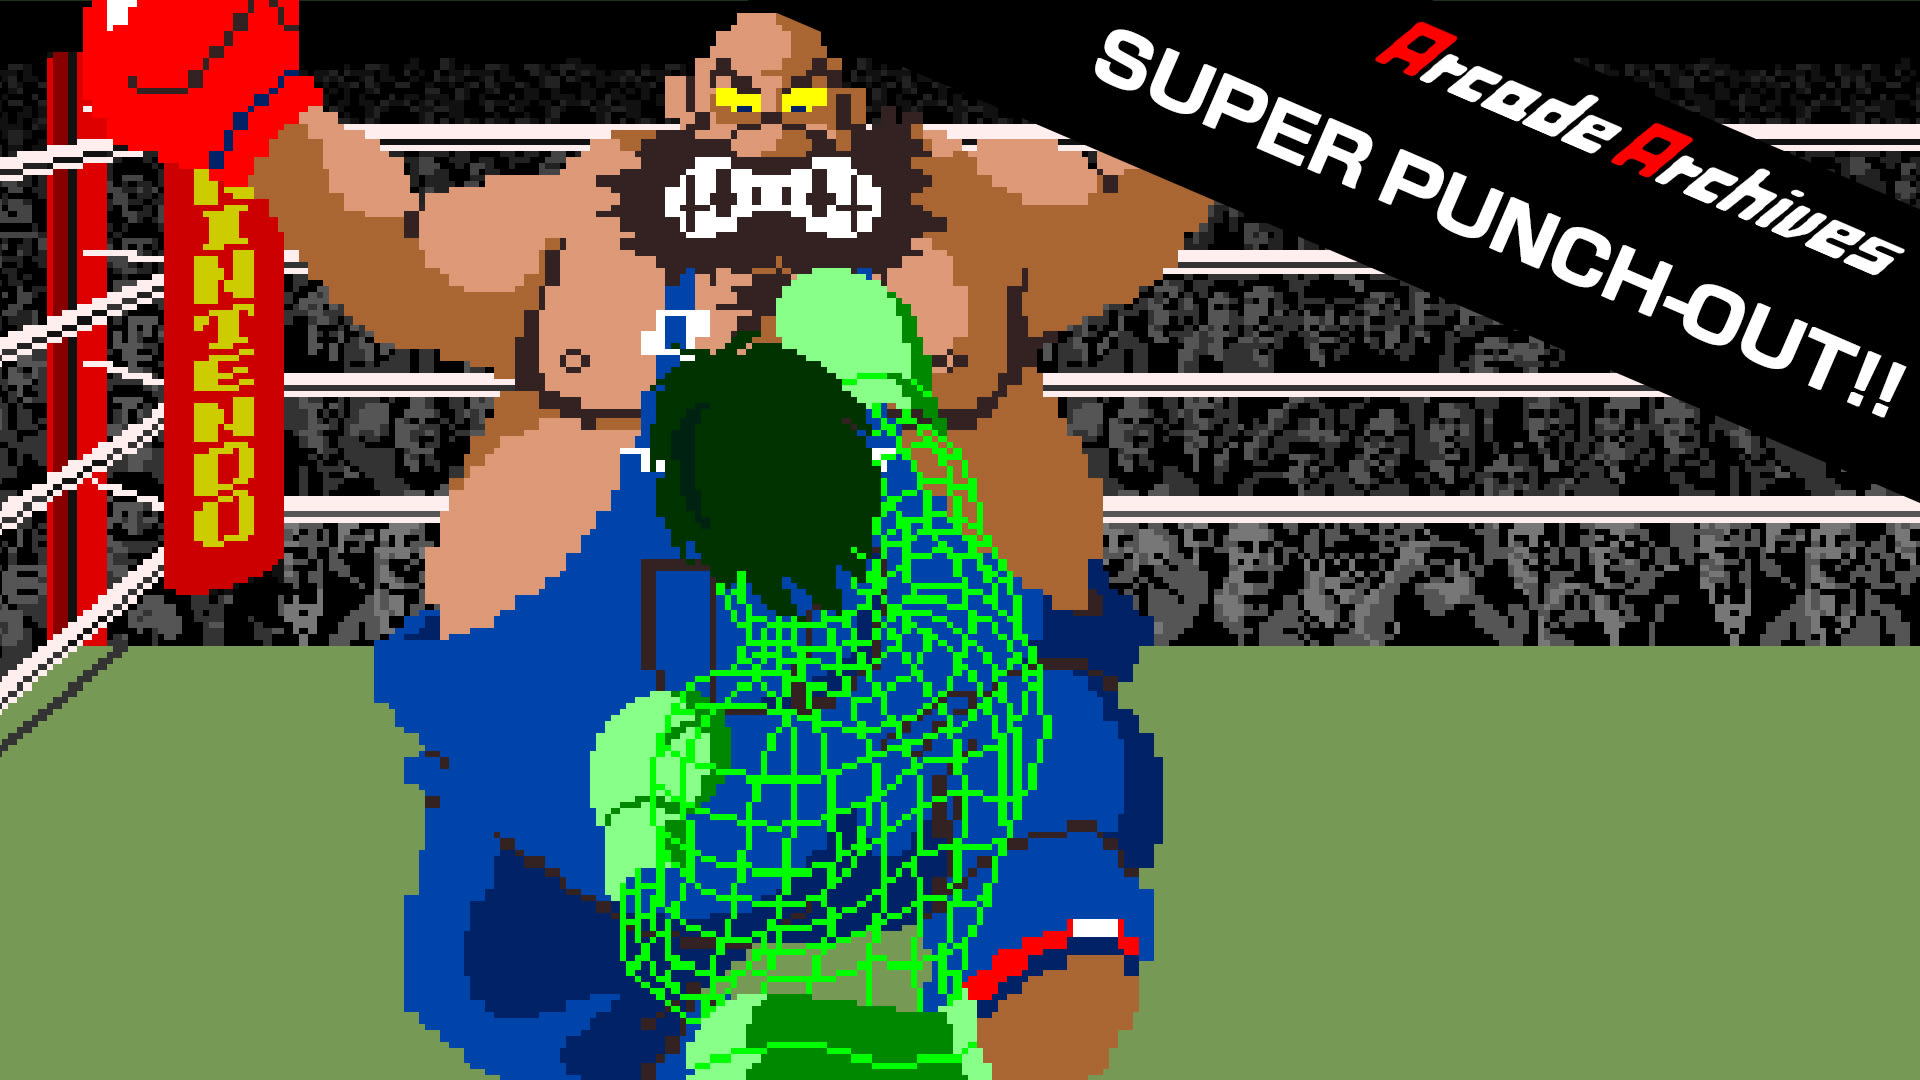 Arcade Archives SUPER PUNCH-OUT!! 1